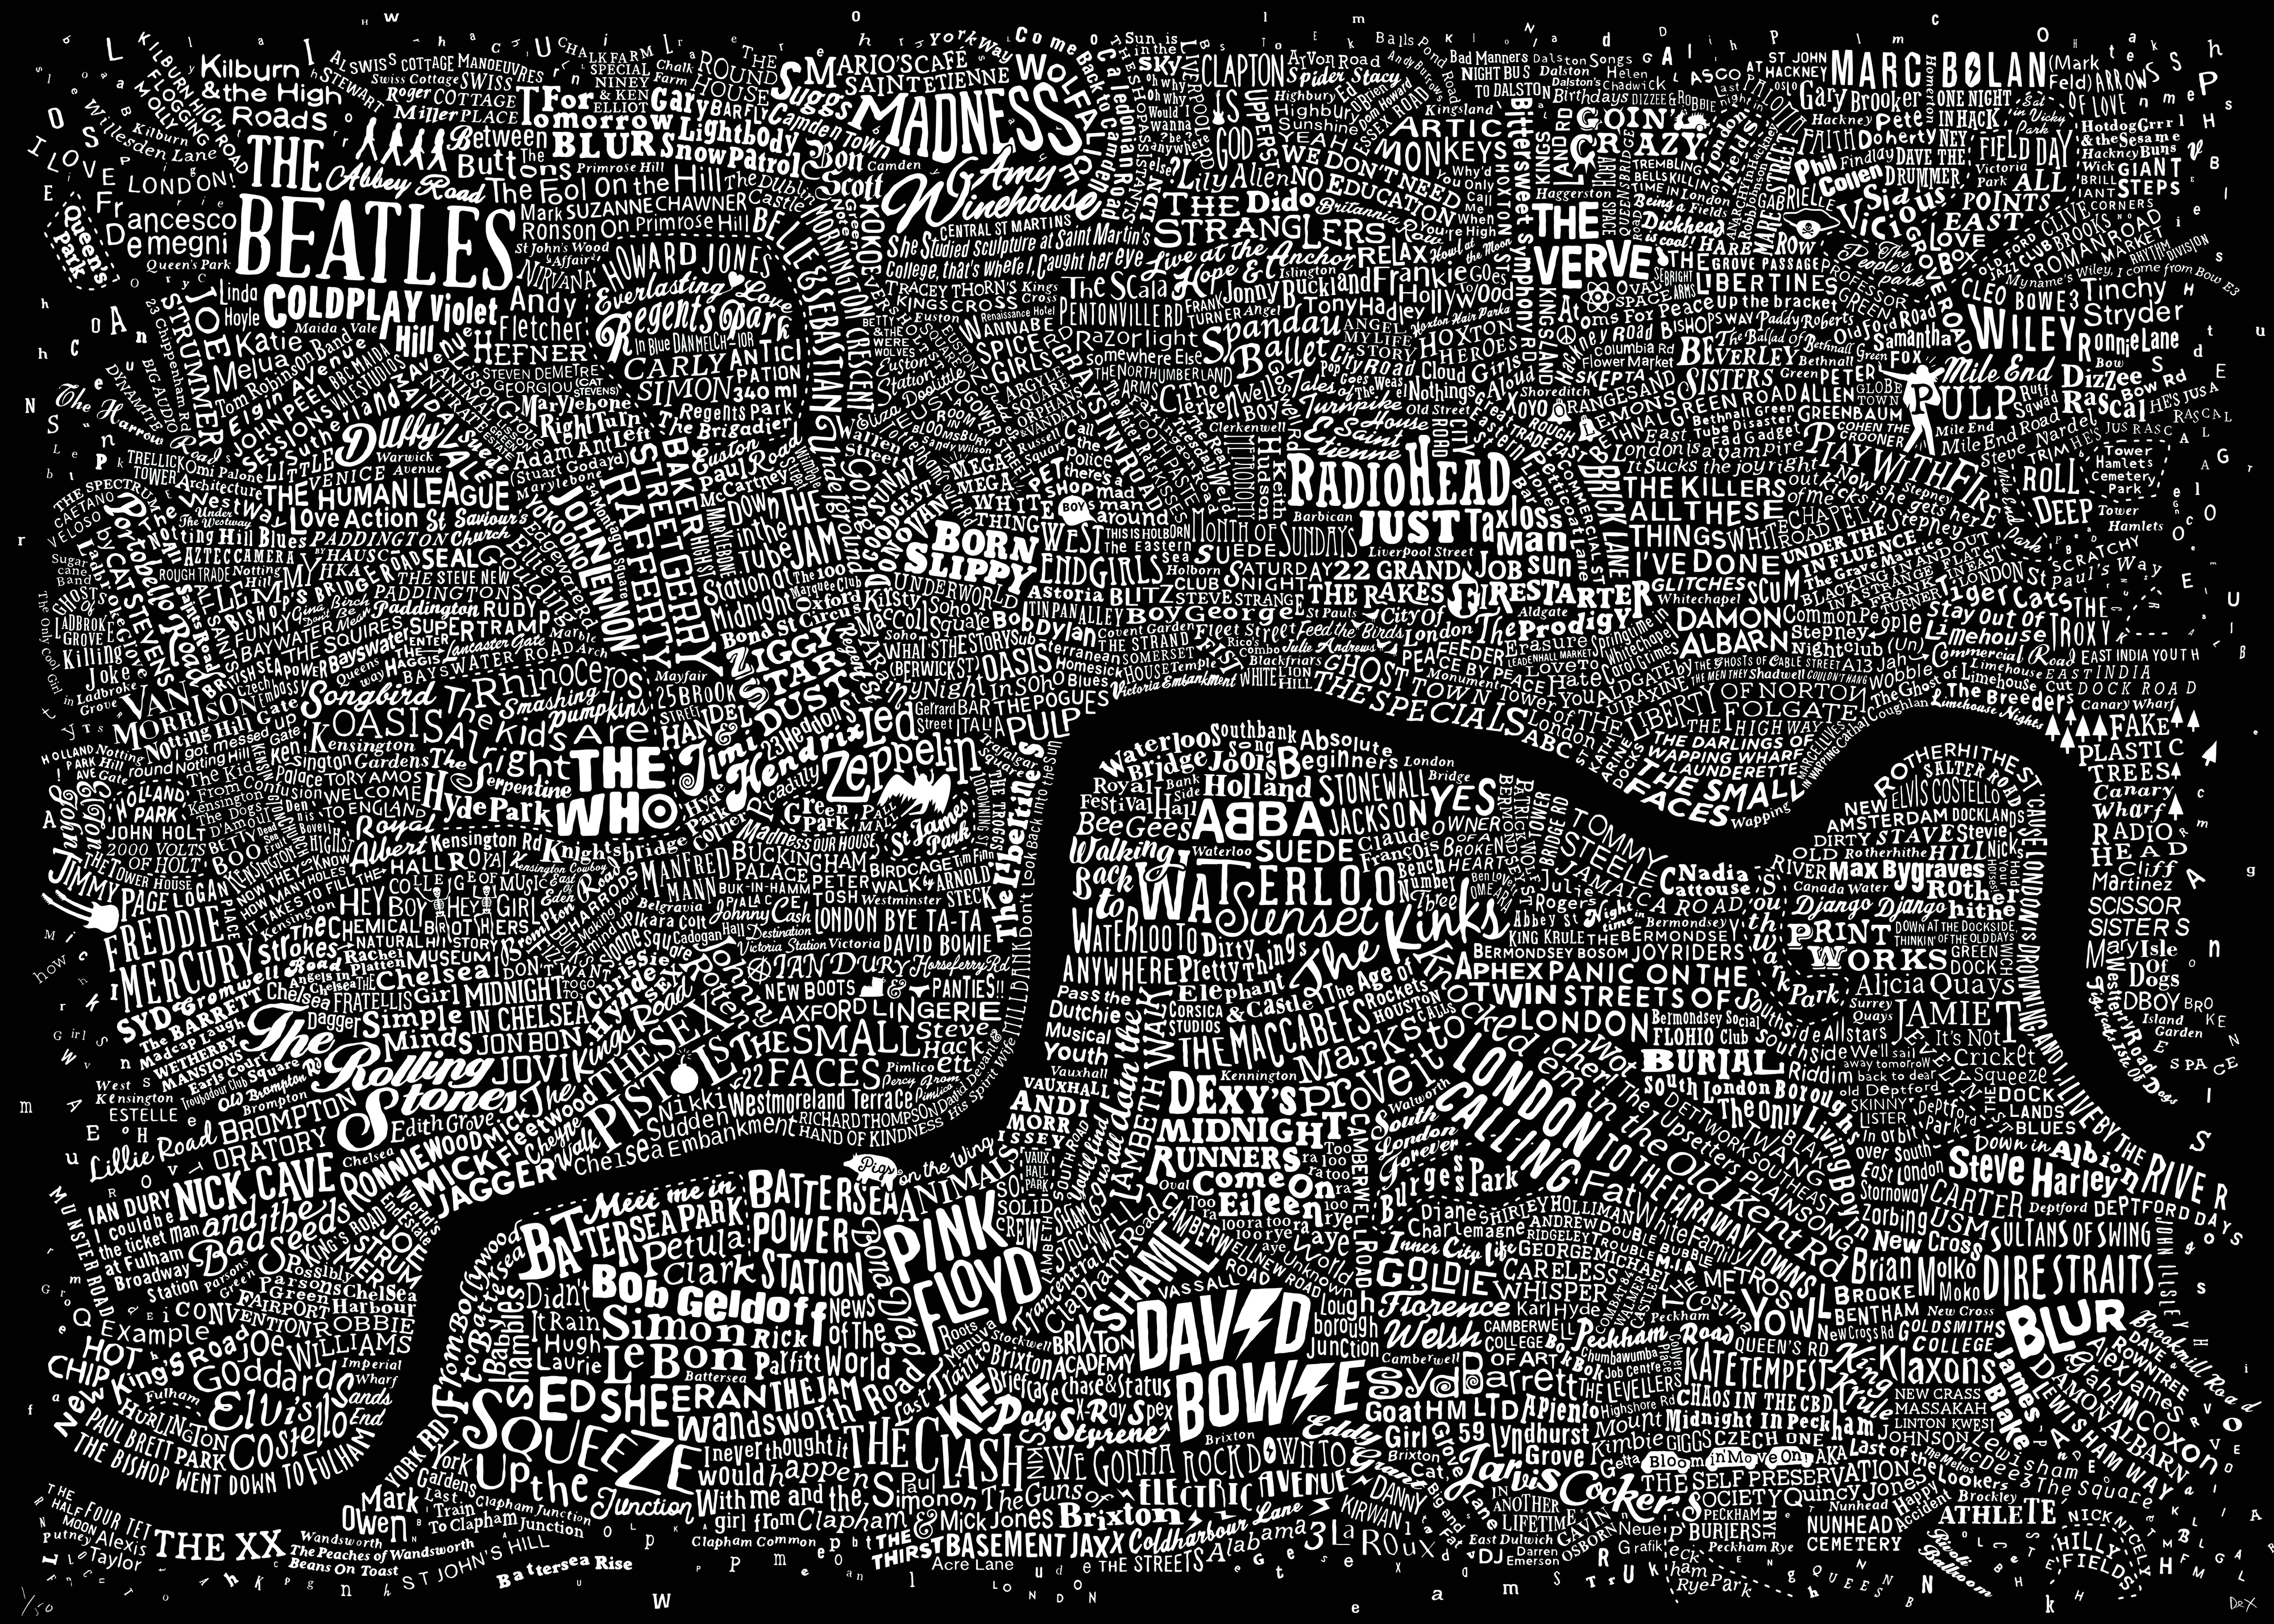 The London Music Map